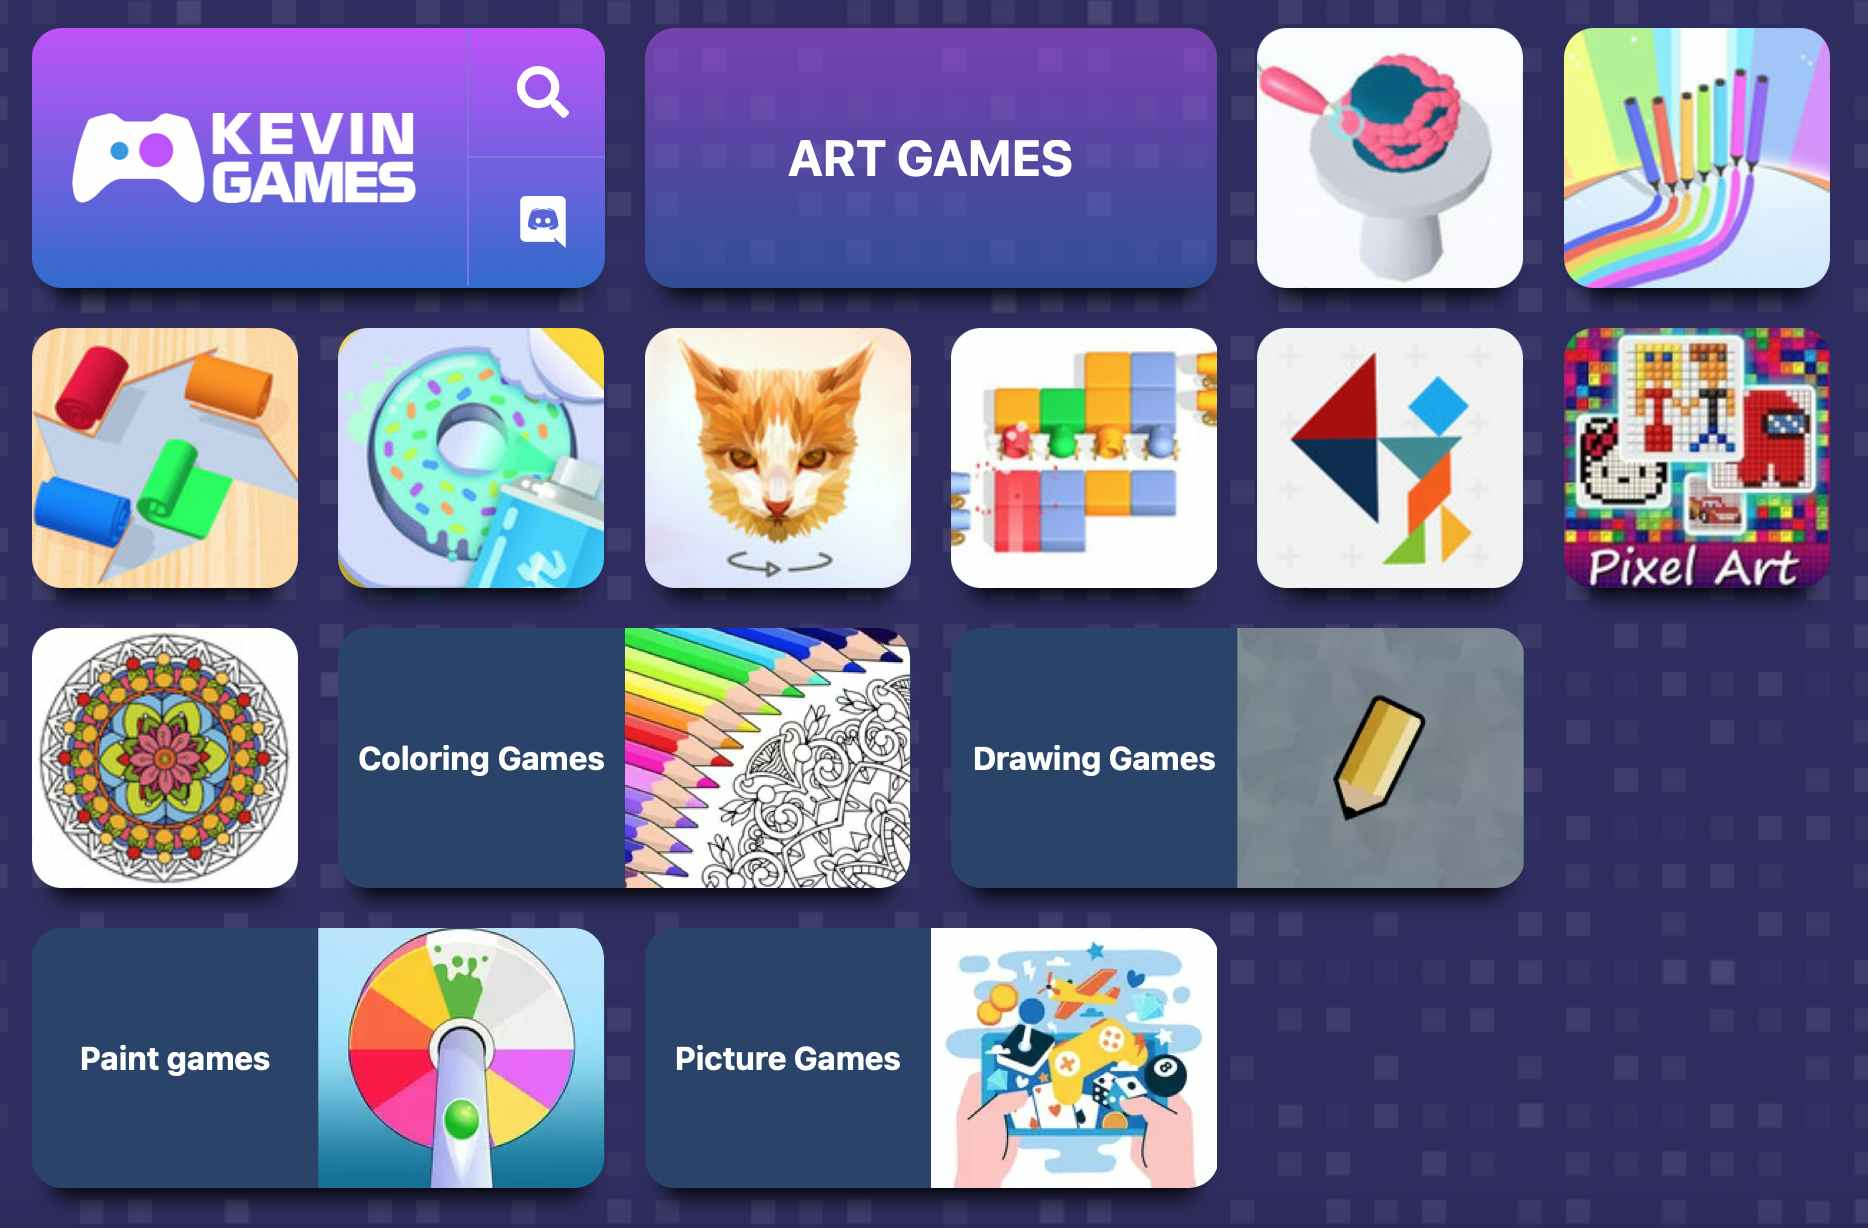 A screenshot from Kevin Games art games webpage.